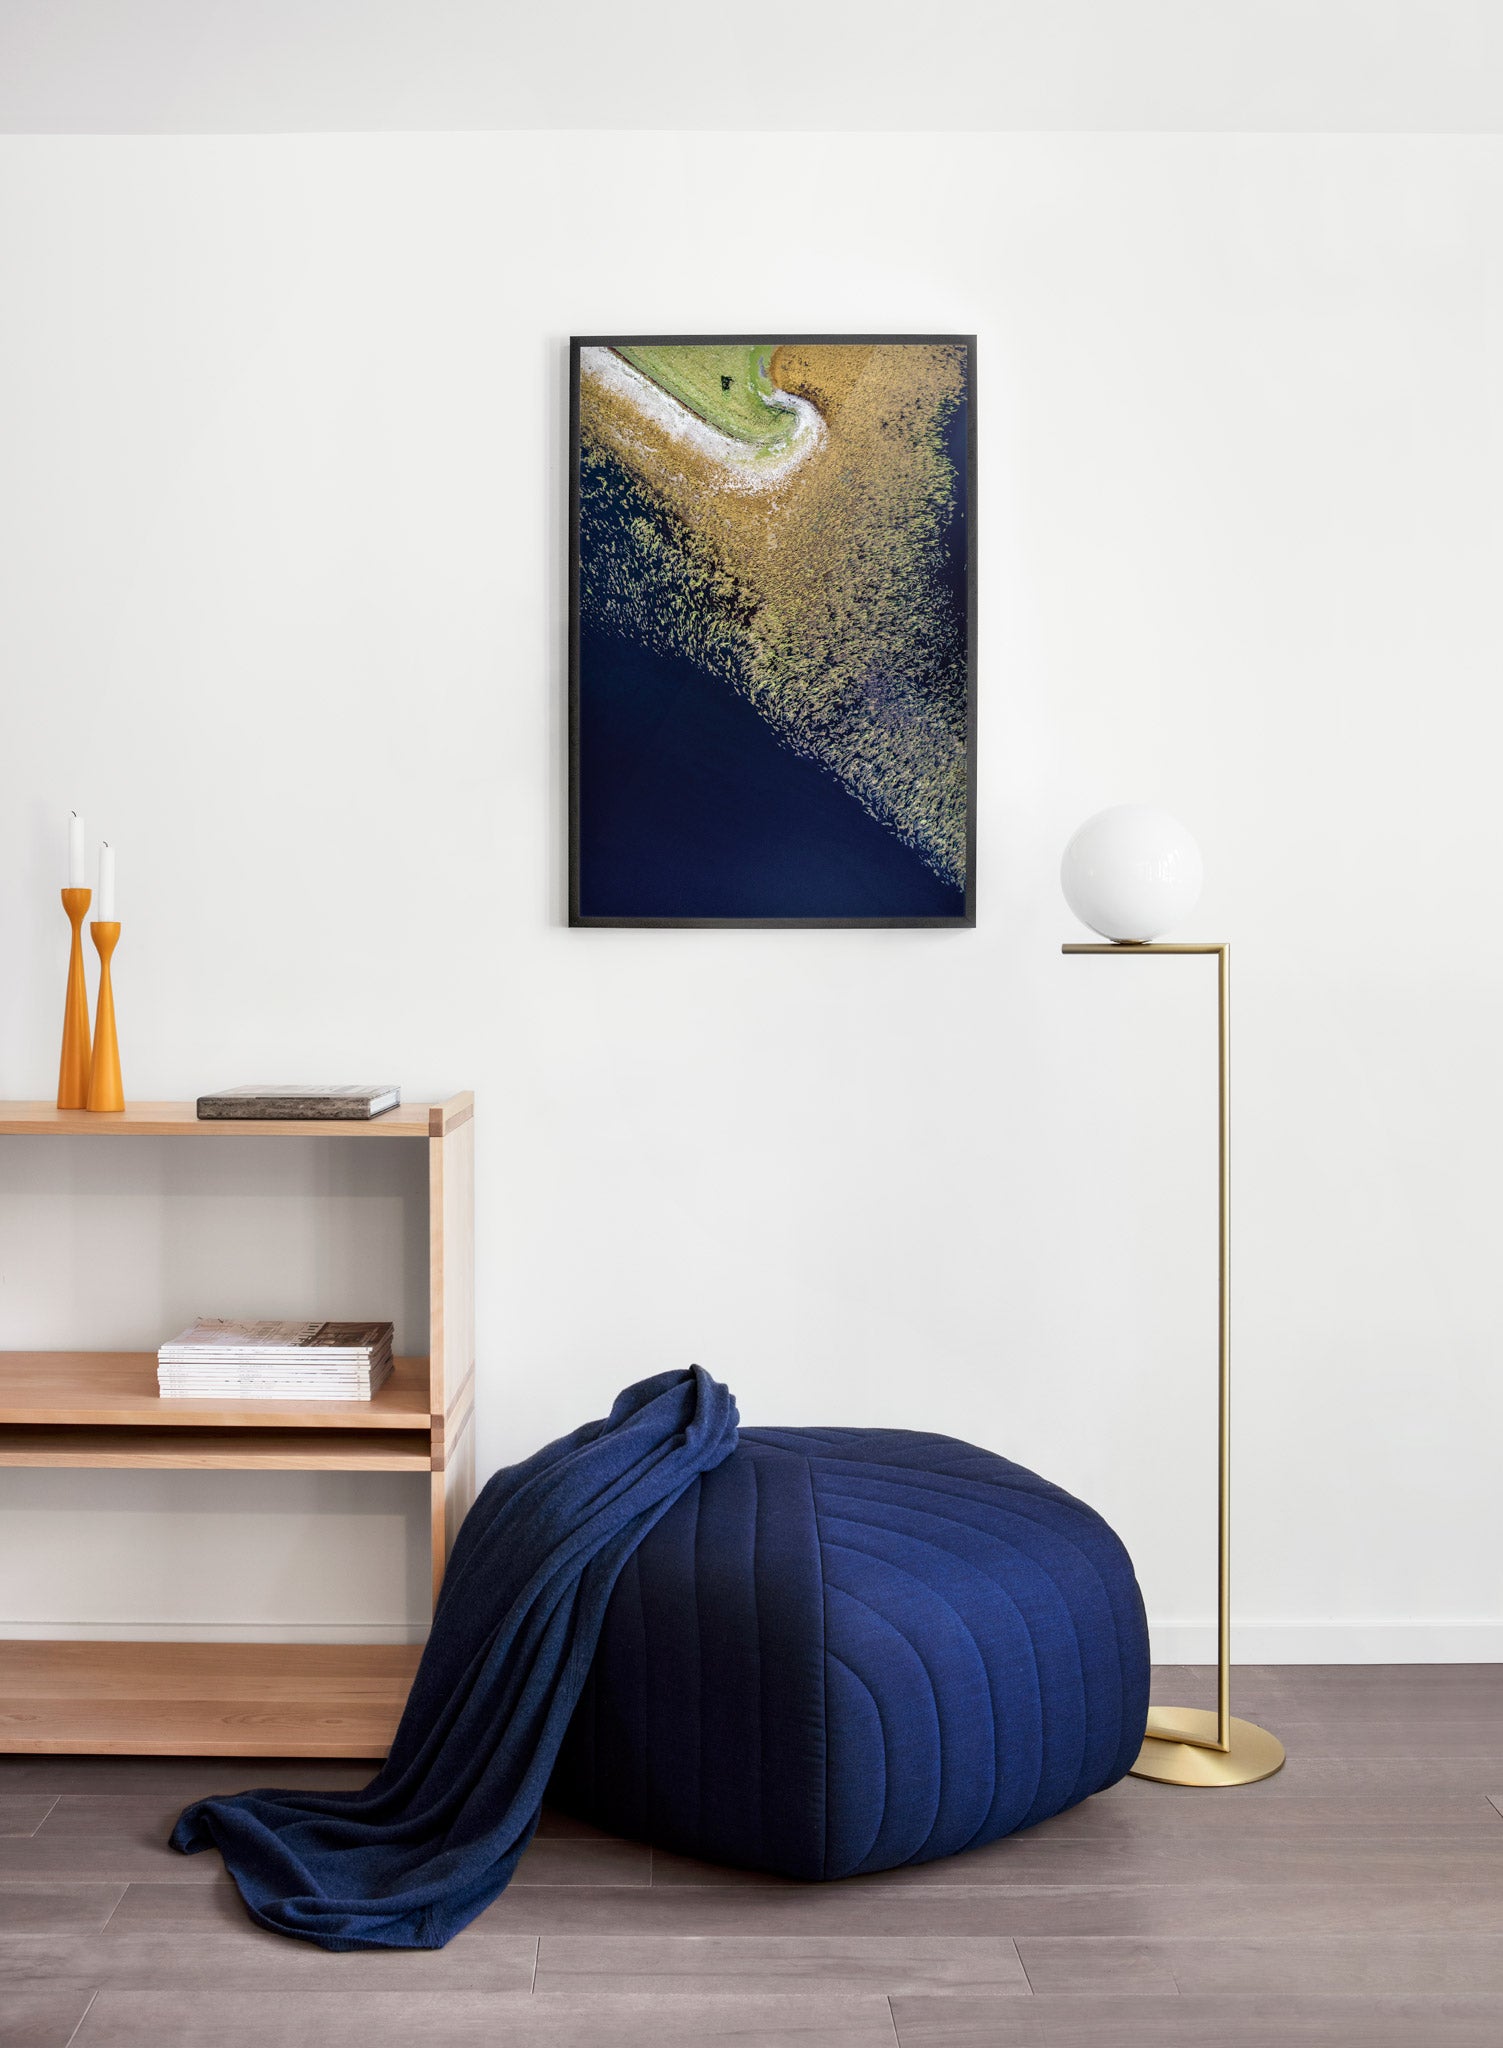 Birdview modern minimalist photography poster by Opposite Wall - Living room pouf